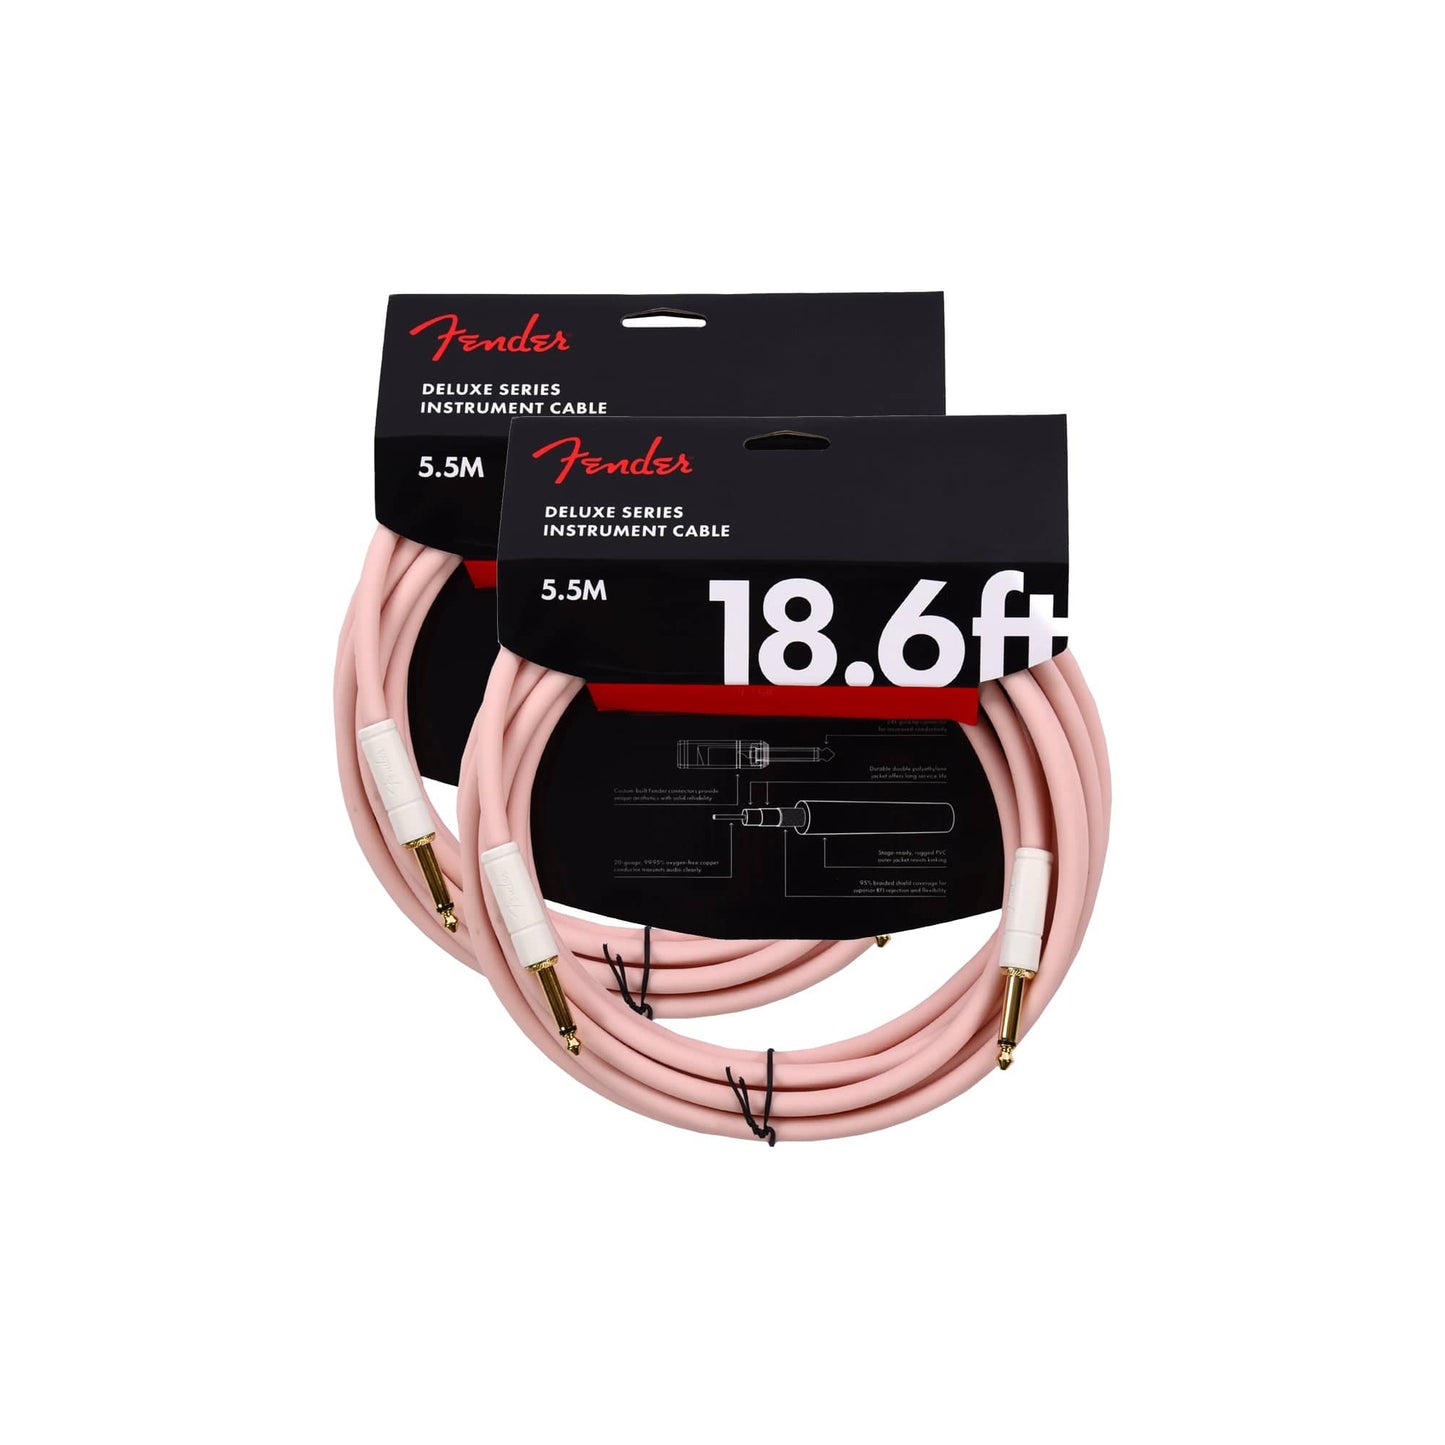 Fender Deluxe Instrument Cable Shell Pink 18.6' Straight-Straight (CME Exclusive) 2 Pack Bundle Accessories / Cables